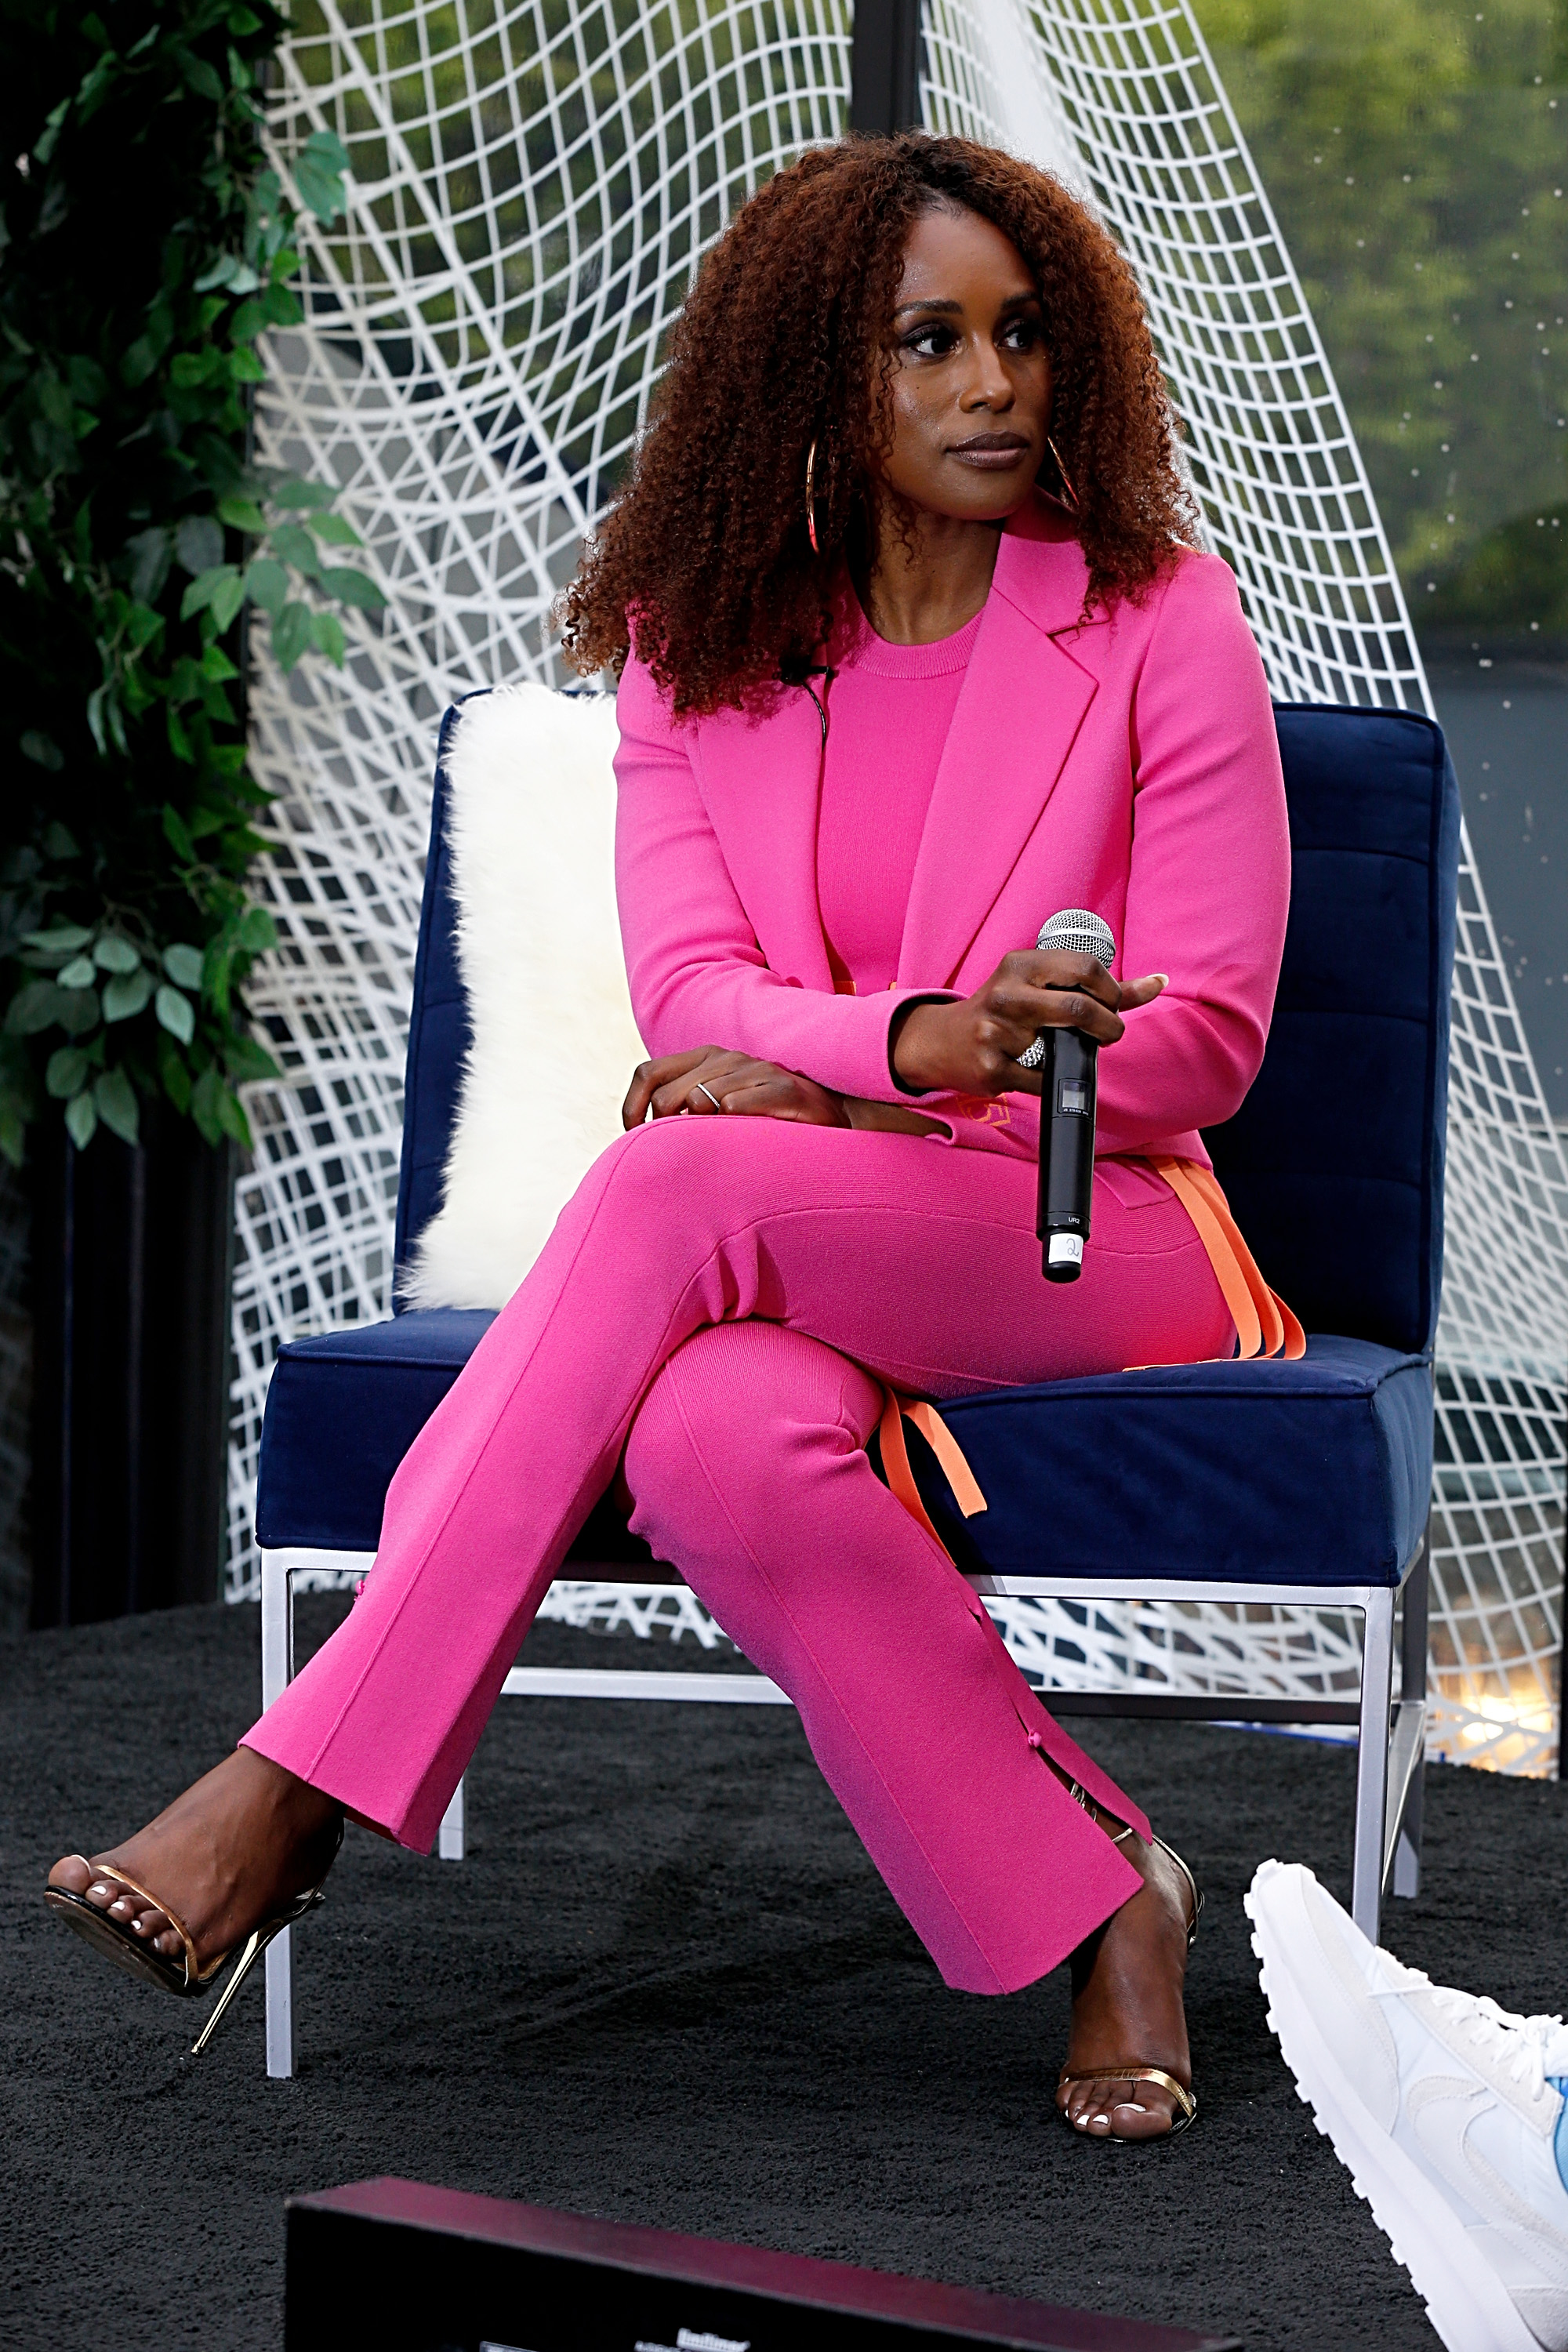 Issa Rae attends the SelectCon 004 panel discussion with Issa Rae at 74Wythe on May 05, 2022 in New York City